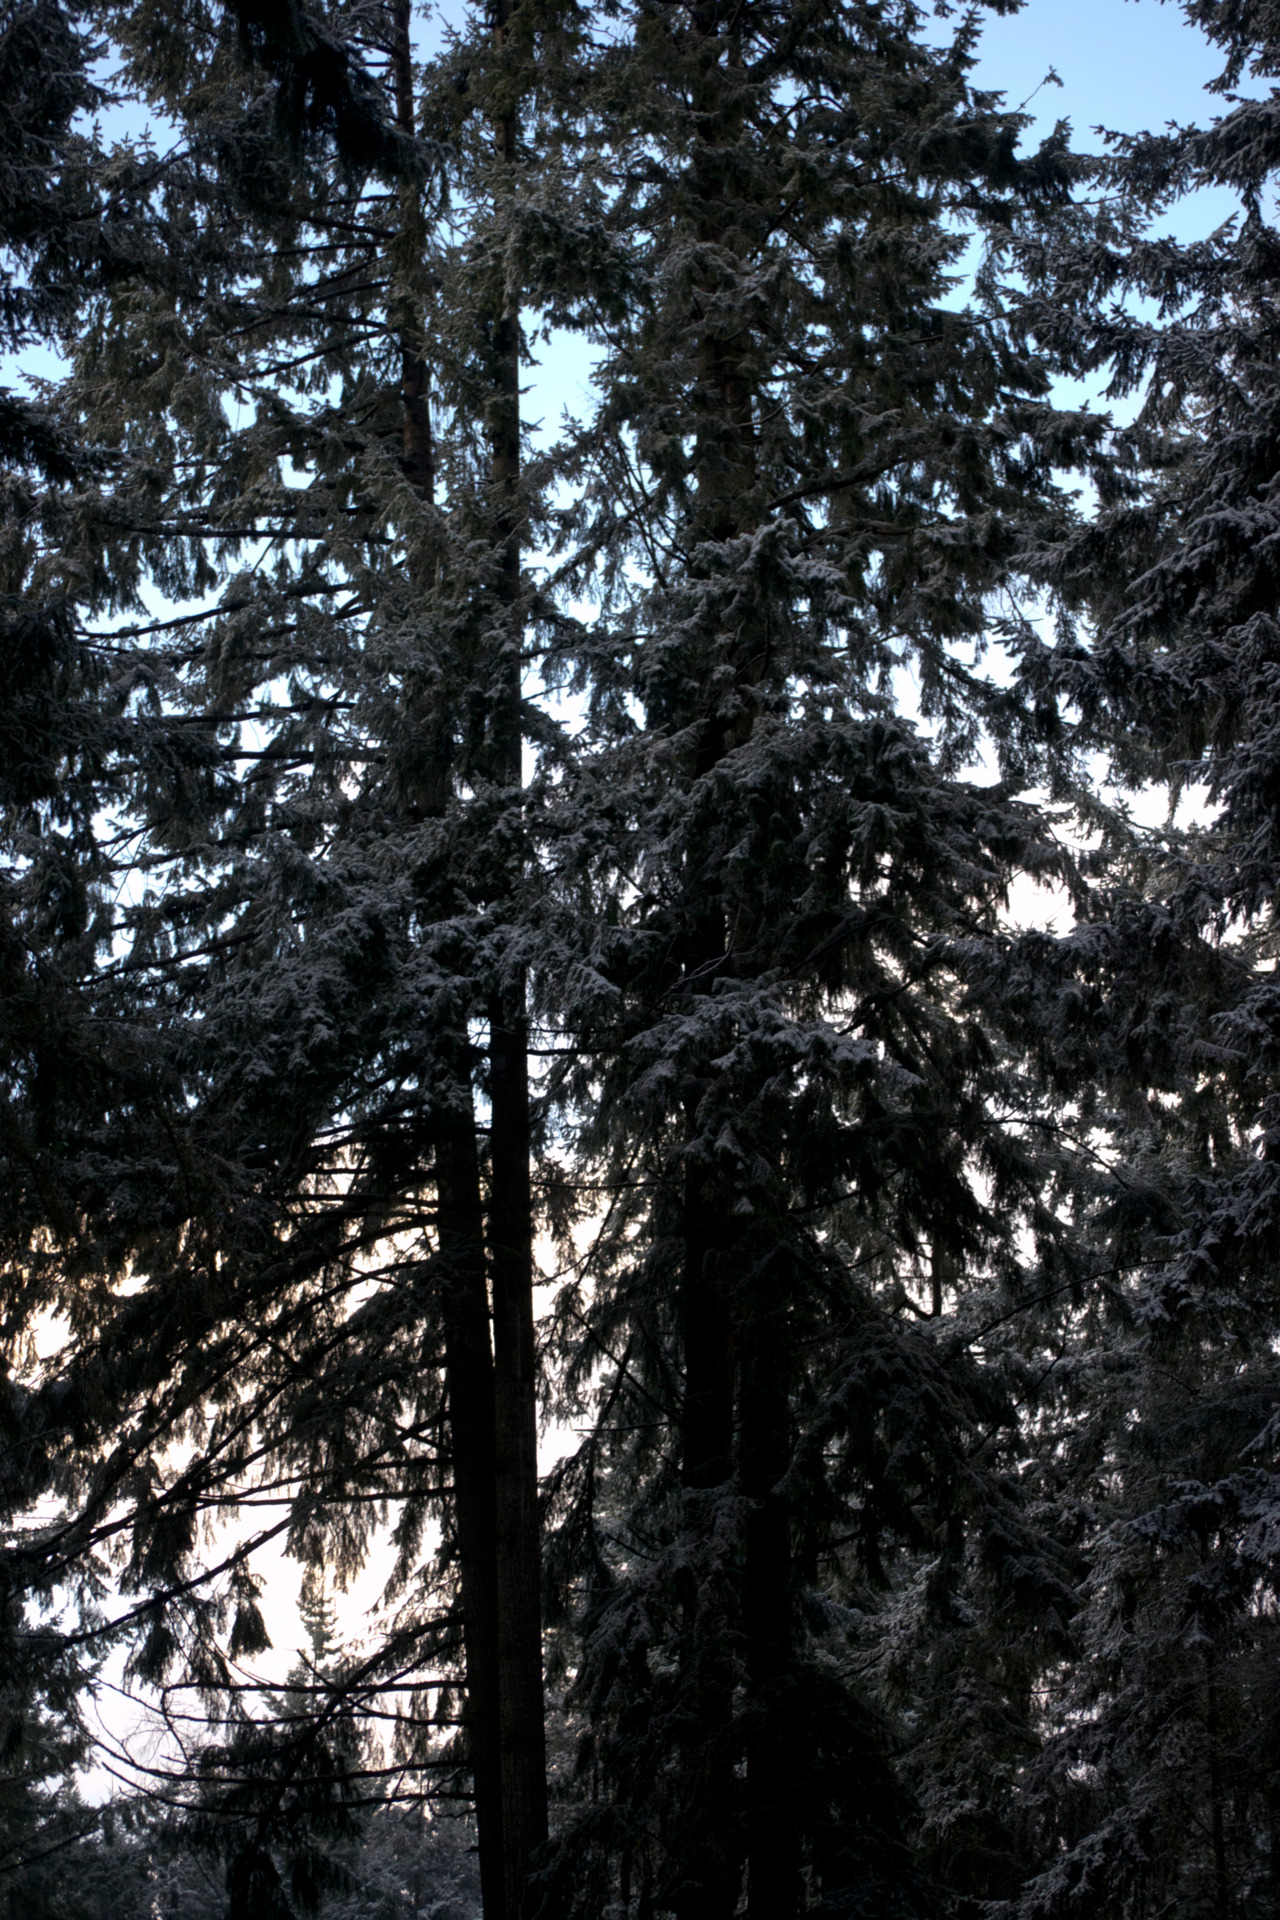 After a snowy day, I took some pictures of the trees in my backyard.